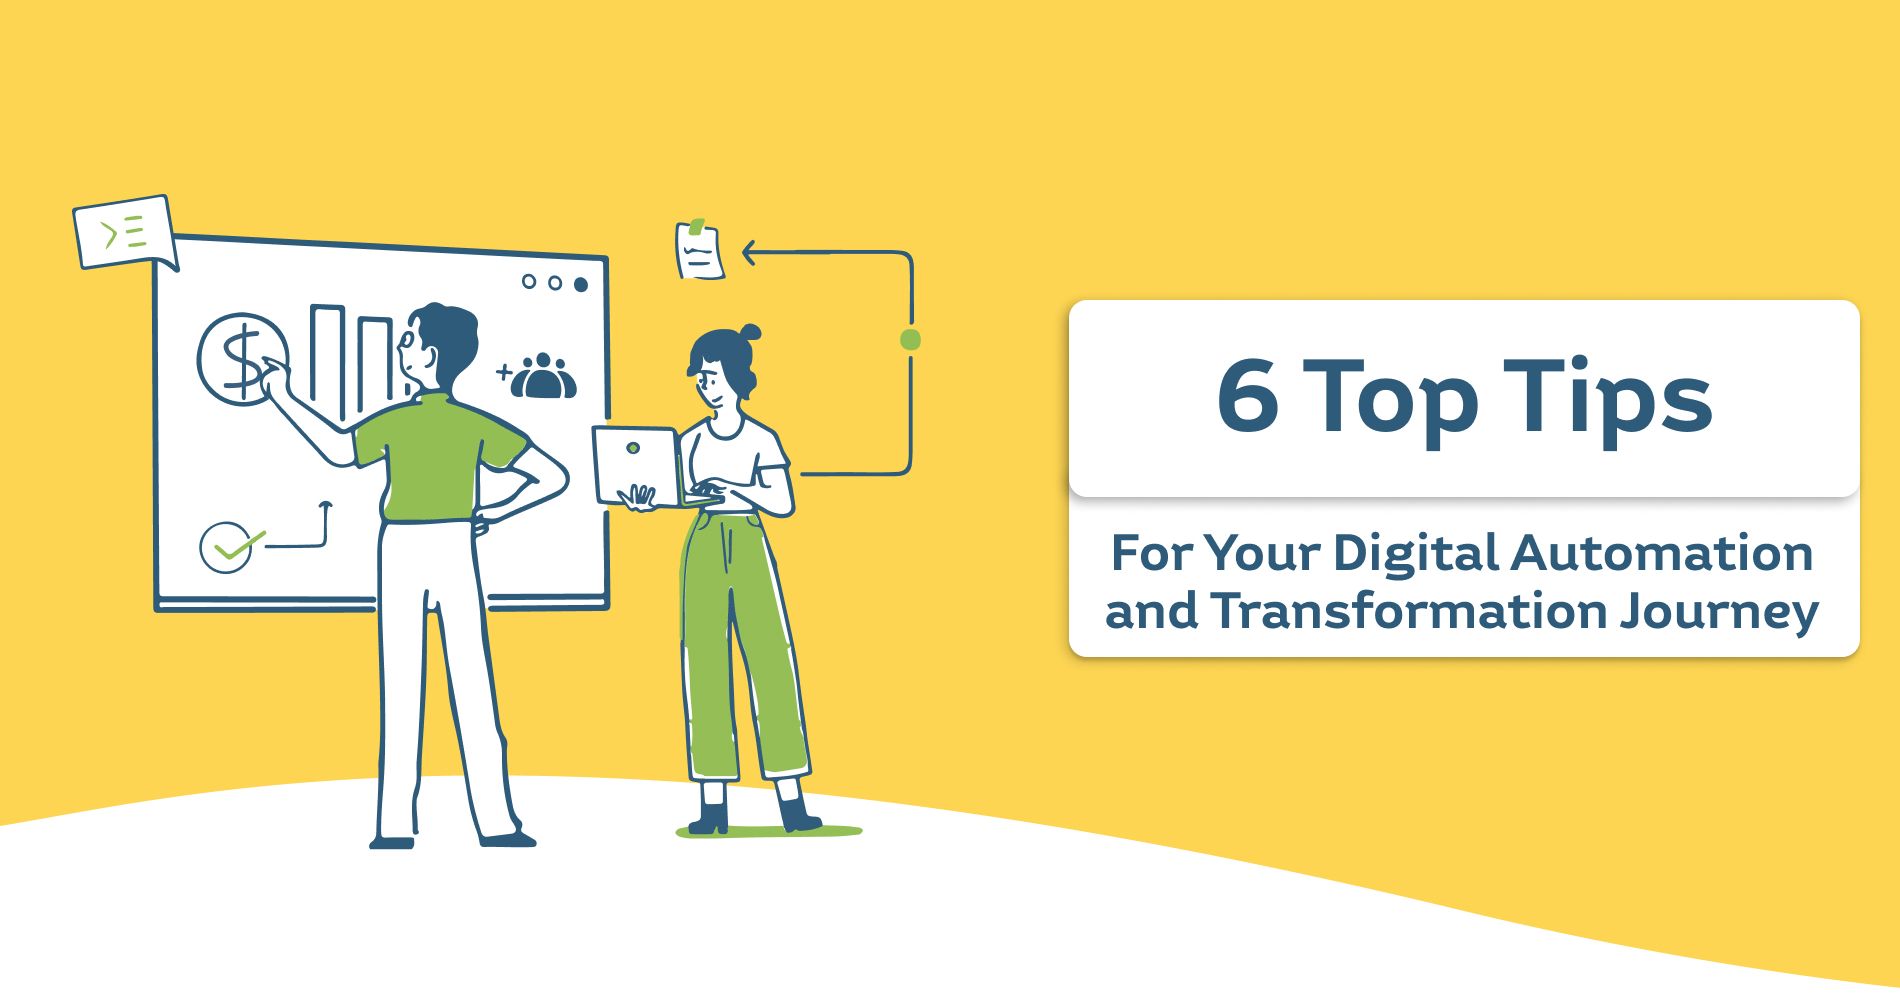 6 Top Tips to Kick-Start Your Digital Automation and Transformation Journey